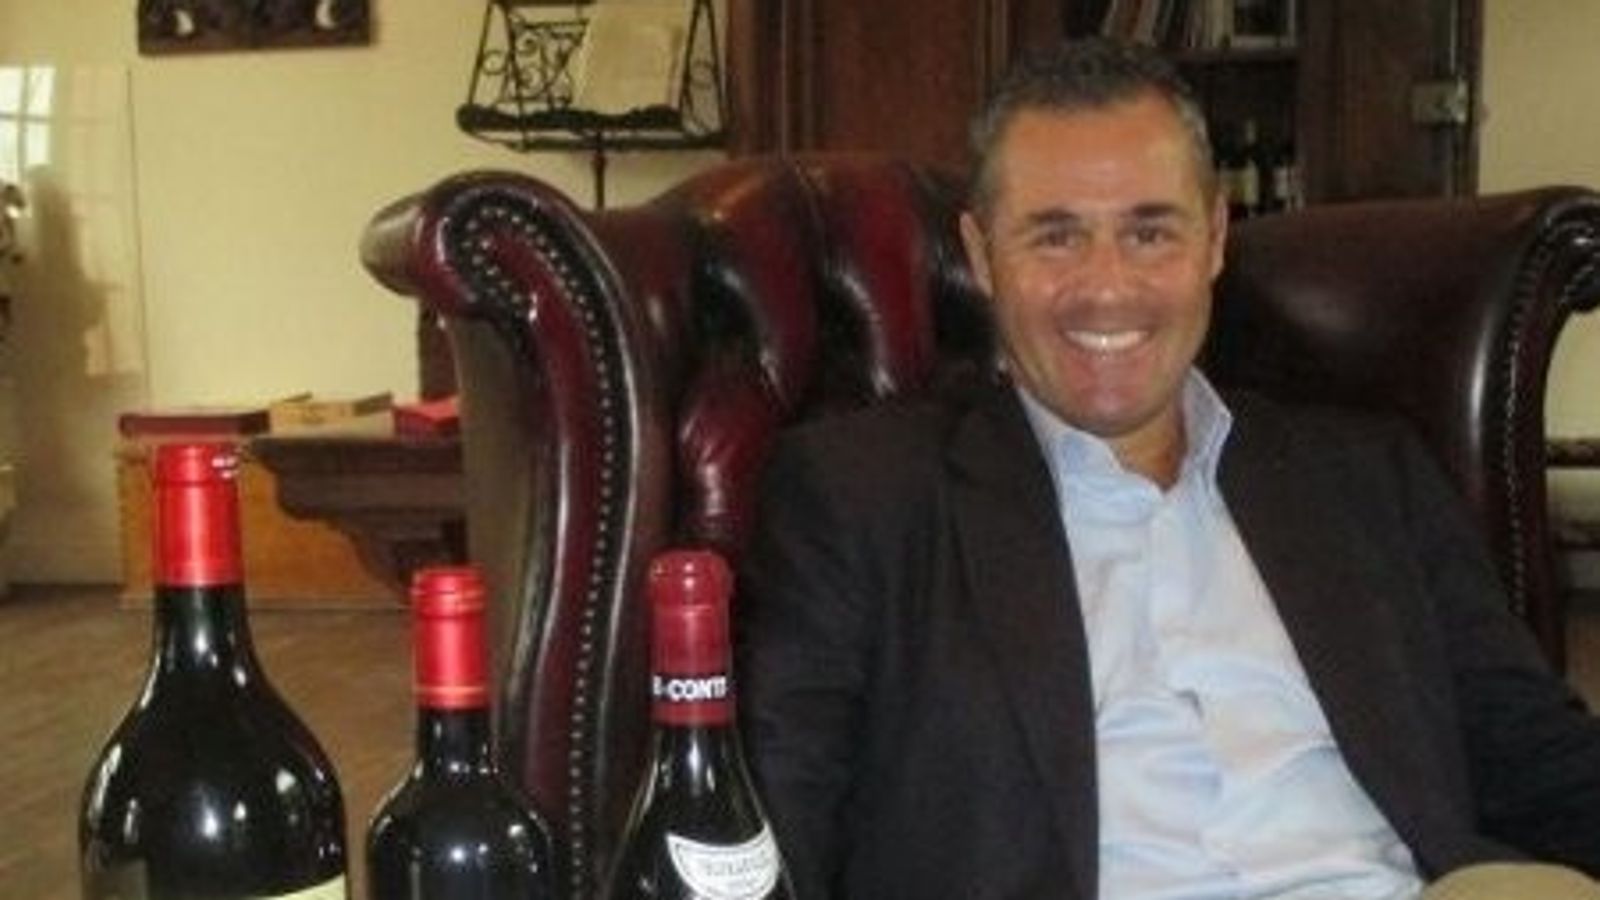 British man accused of swindling nearly 0m in wine fraud case pleads not guilty